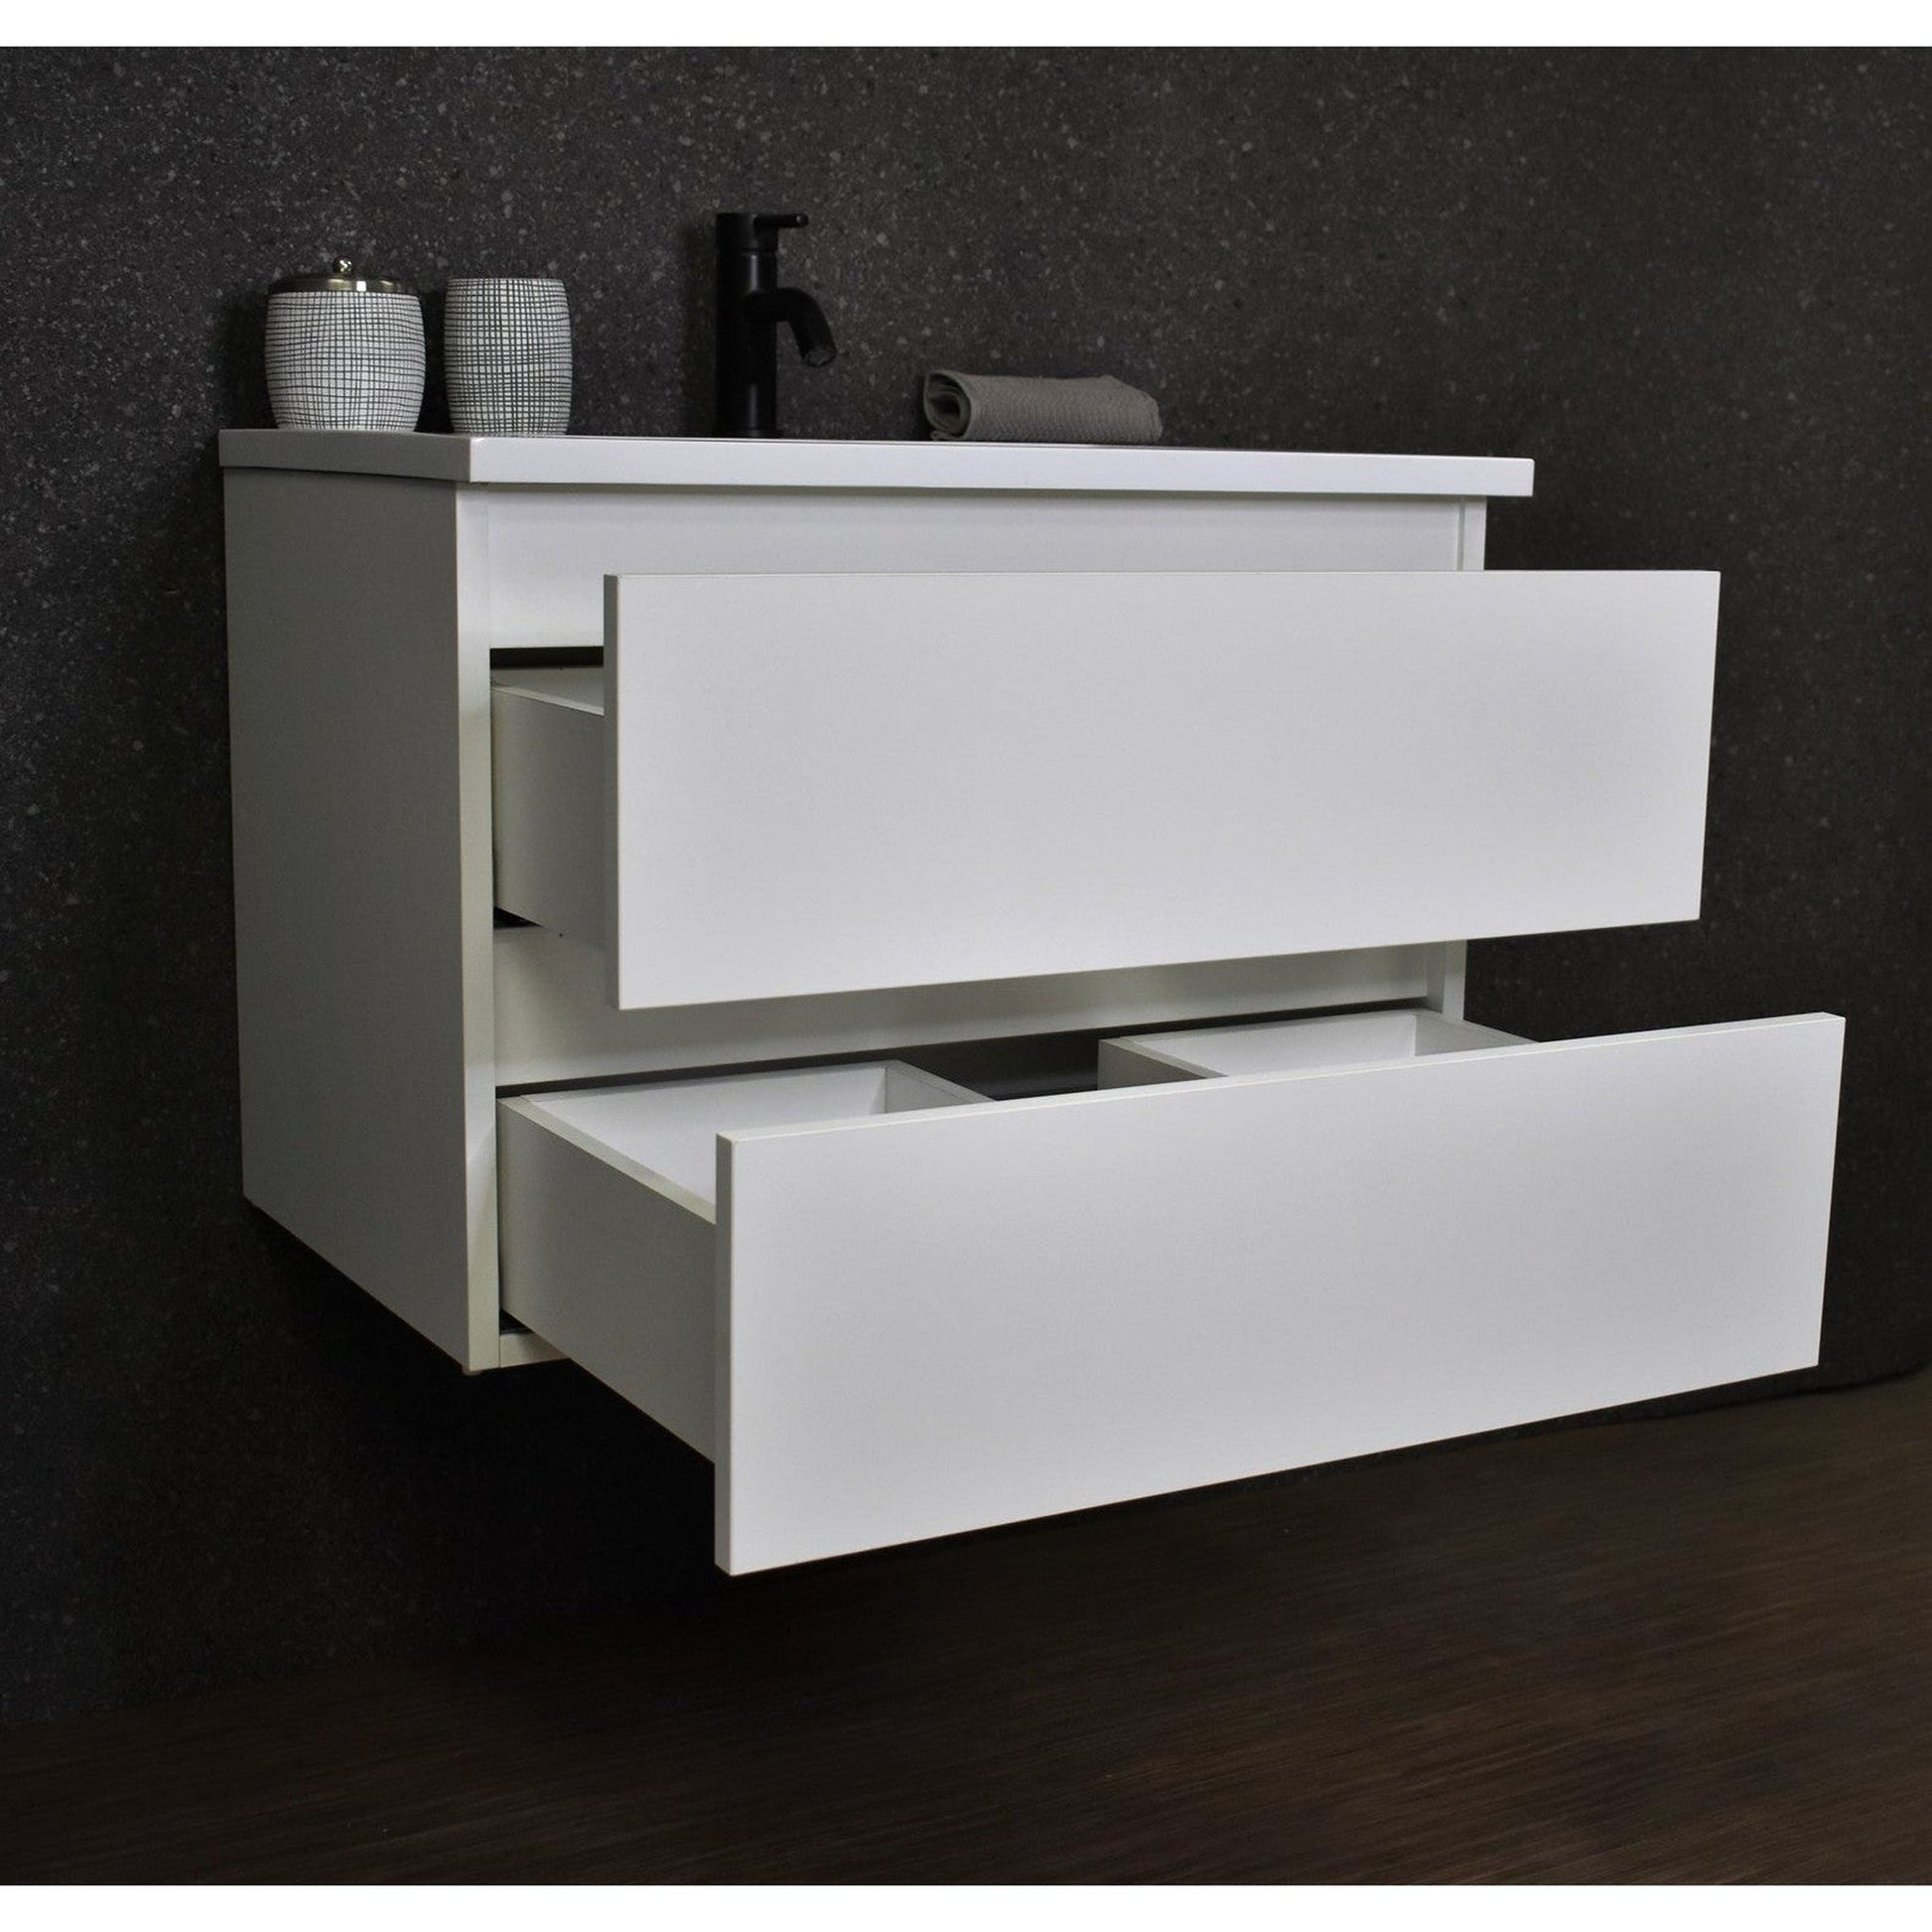 Volpa USA Salt 30" x 20" Glossy White Wall-Mounted Floating Bathroom Vanity With Drawers, Acrylic Top and Integrated Acrylic Sink